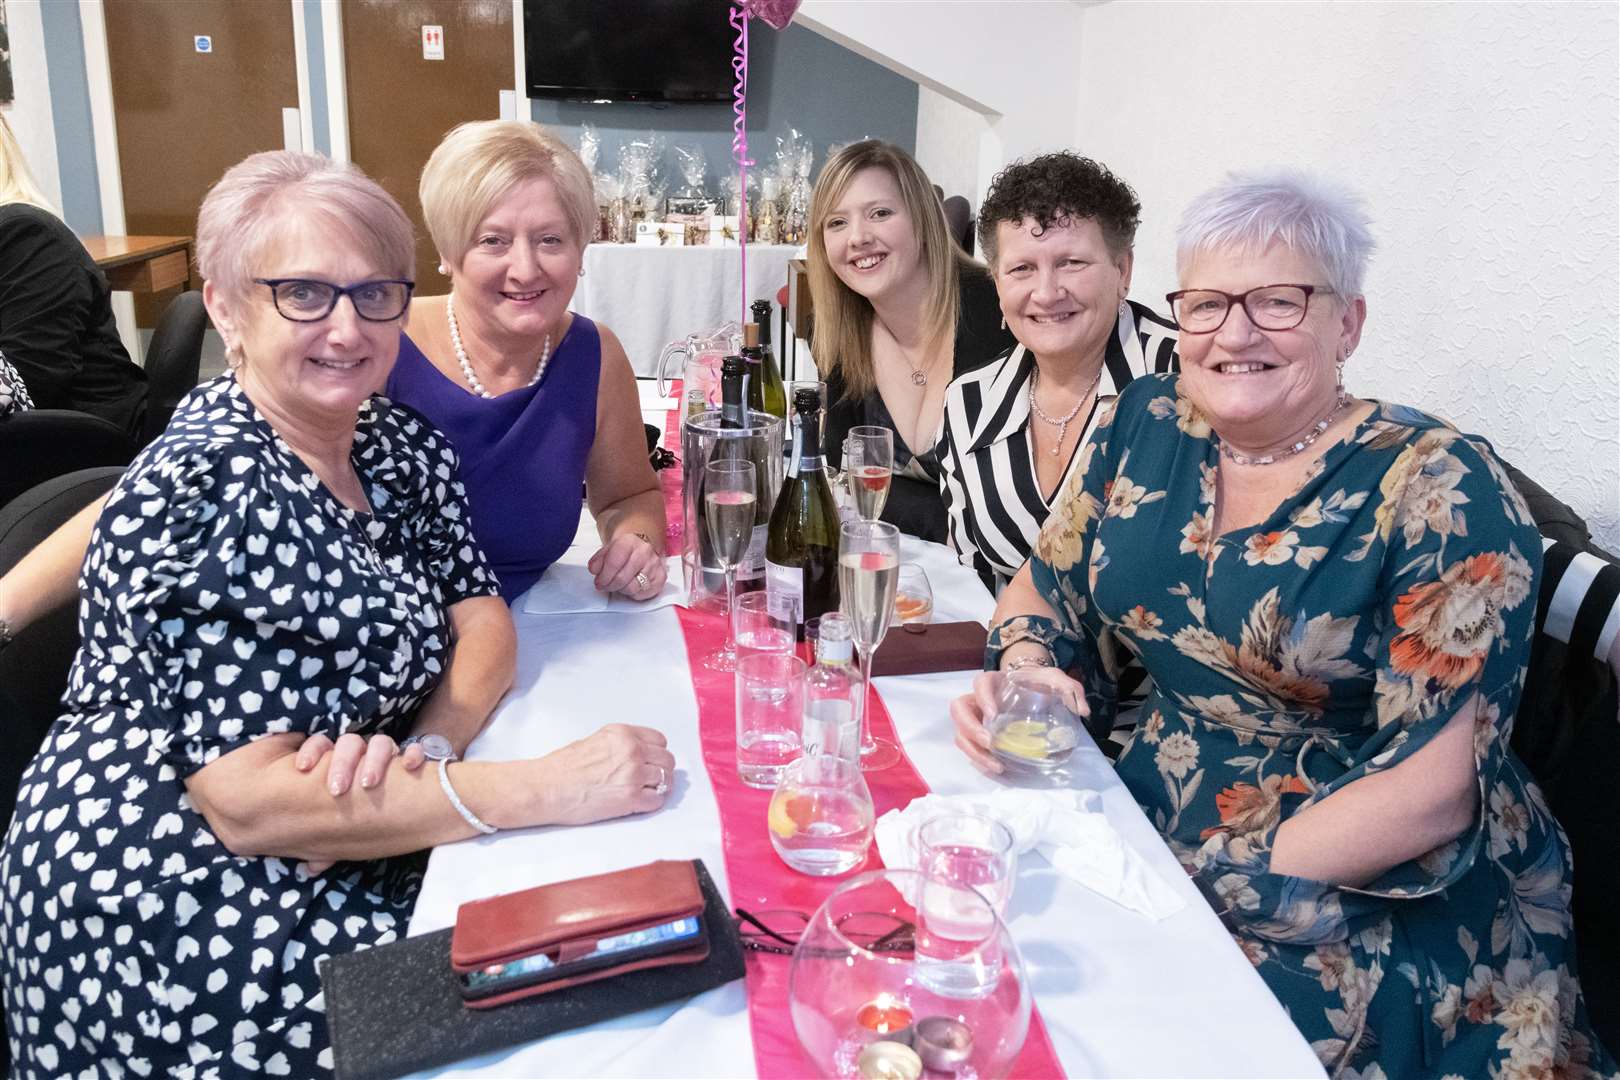 Family and friends Catherine McKenzie, Jena Dean, Karly MacConnachie, Brenda MacDonald and Tina Hannan dressed to impress. Picture: Beth Taylor